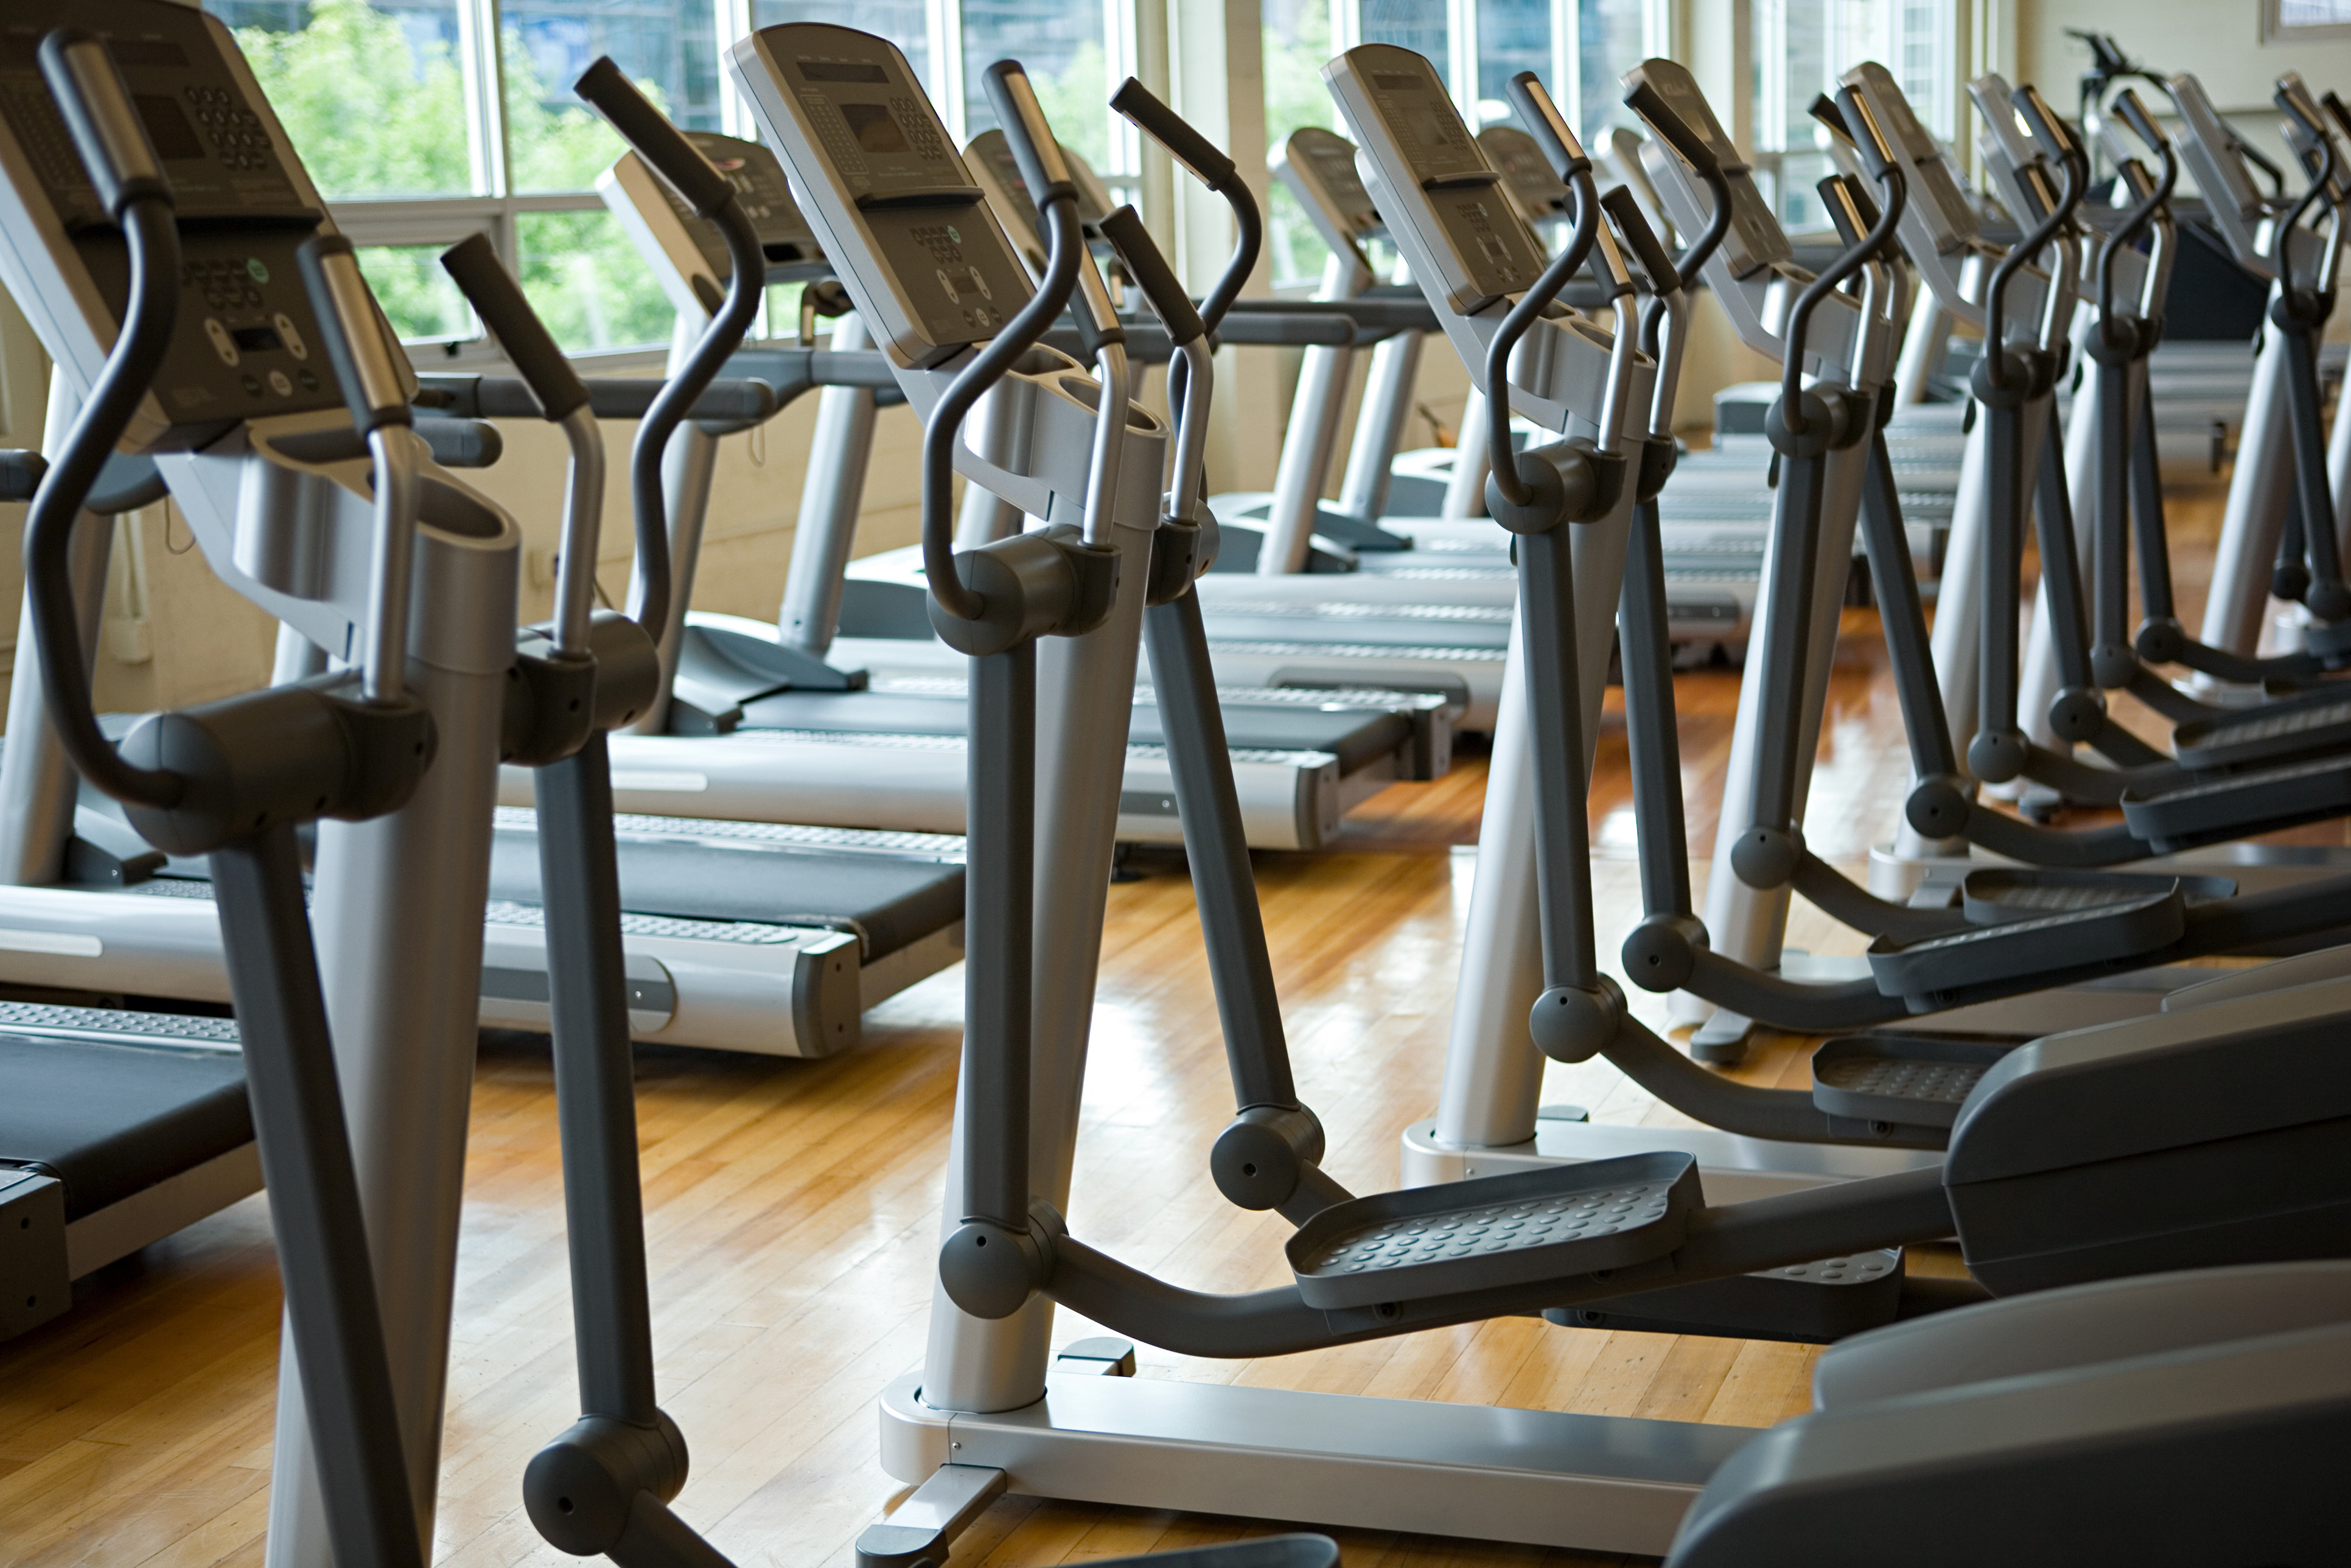 Profitable Turnkey Fitness Equipment Repair Business Available